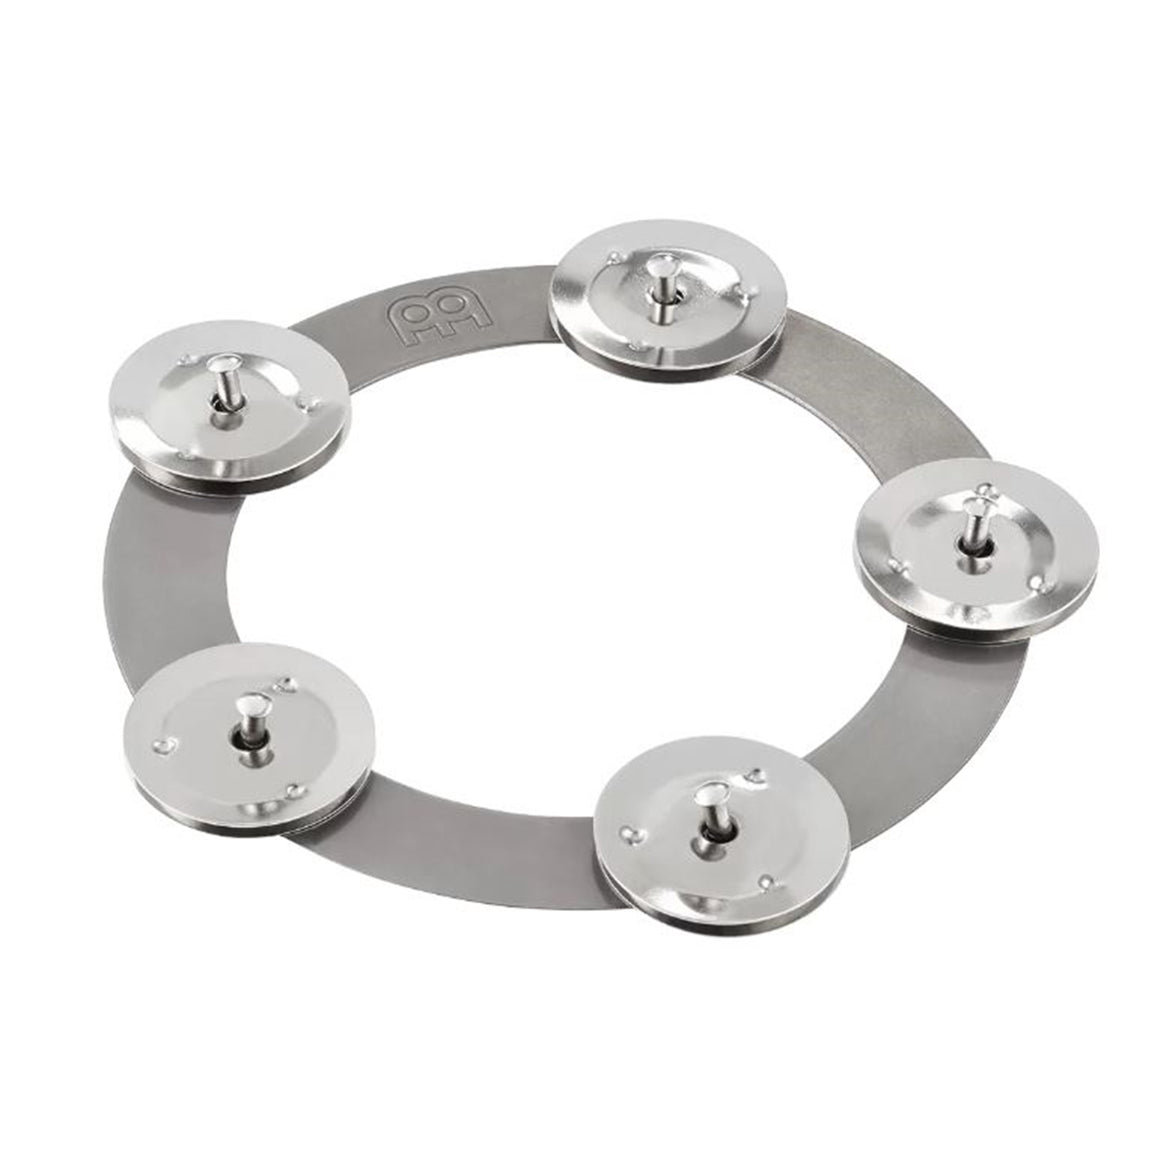 MEINL PERCUSSN CRING 6" Ching Ring, Stainless Steel Jingles